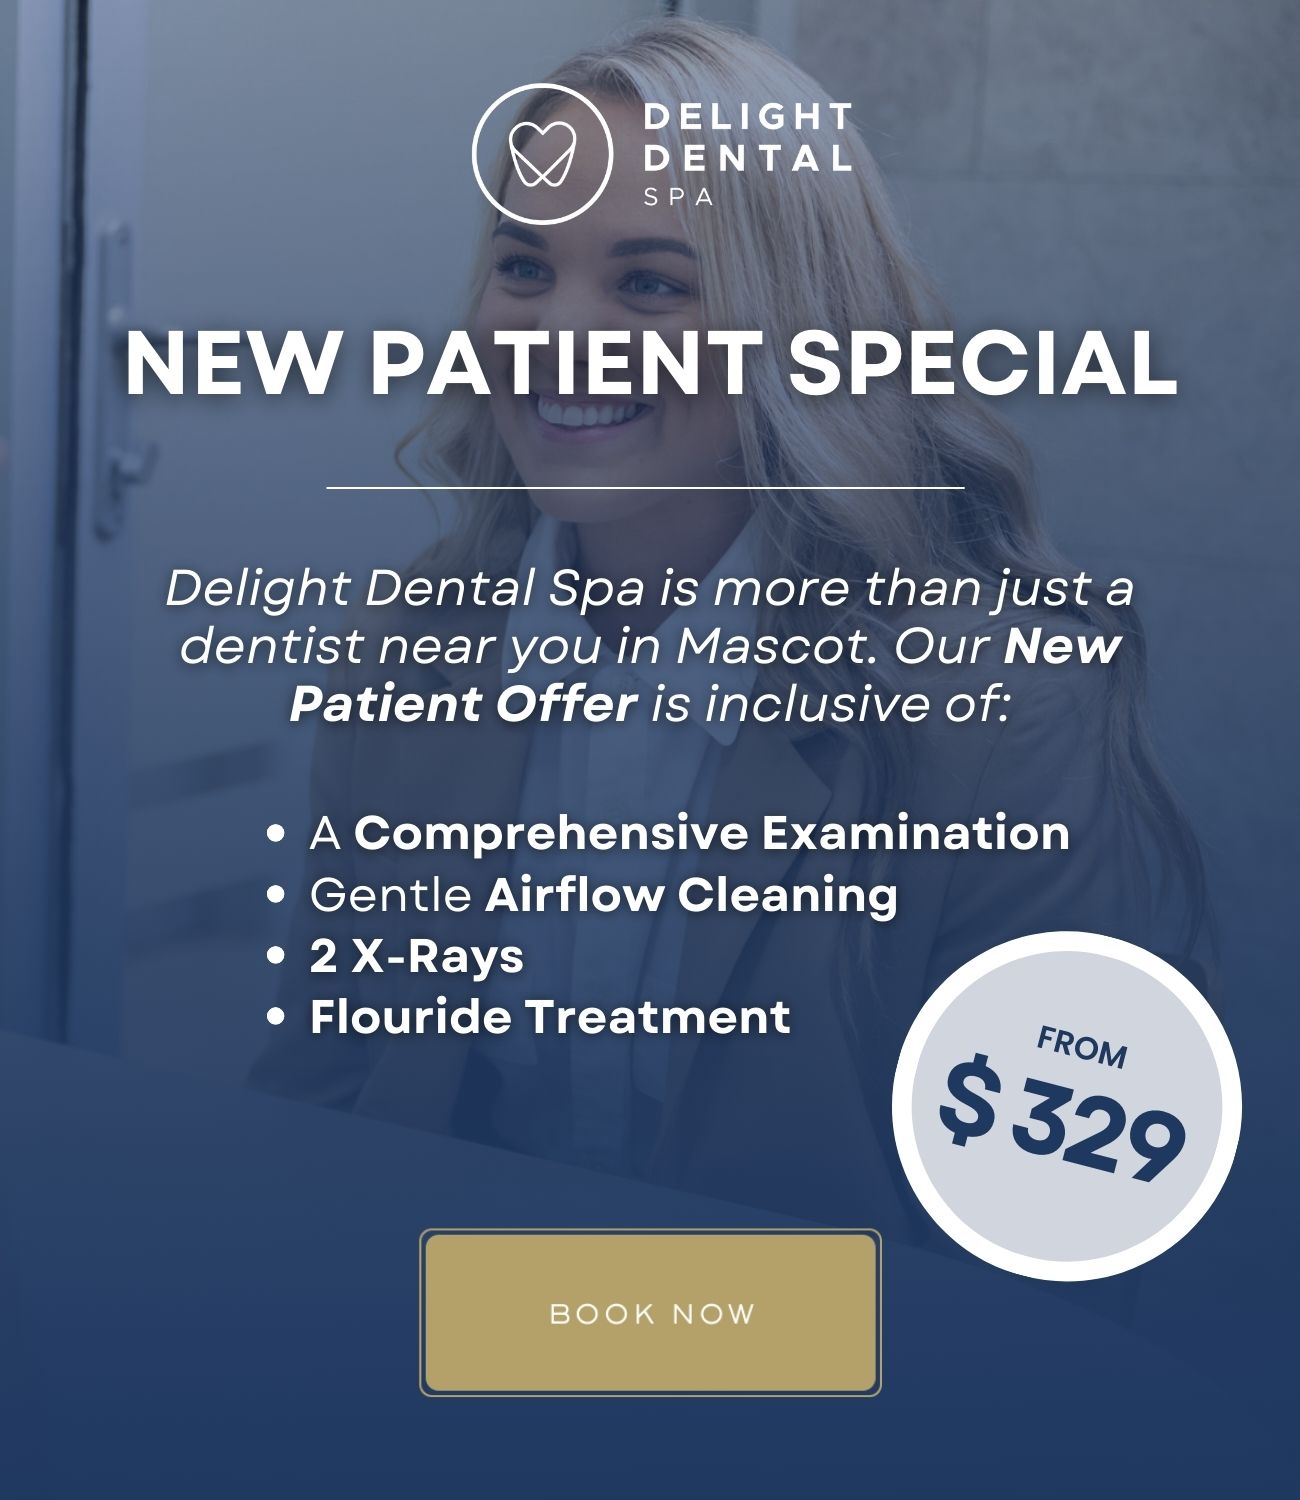 New Patient Offer In Mascot Sydney In Delight Dental Spa